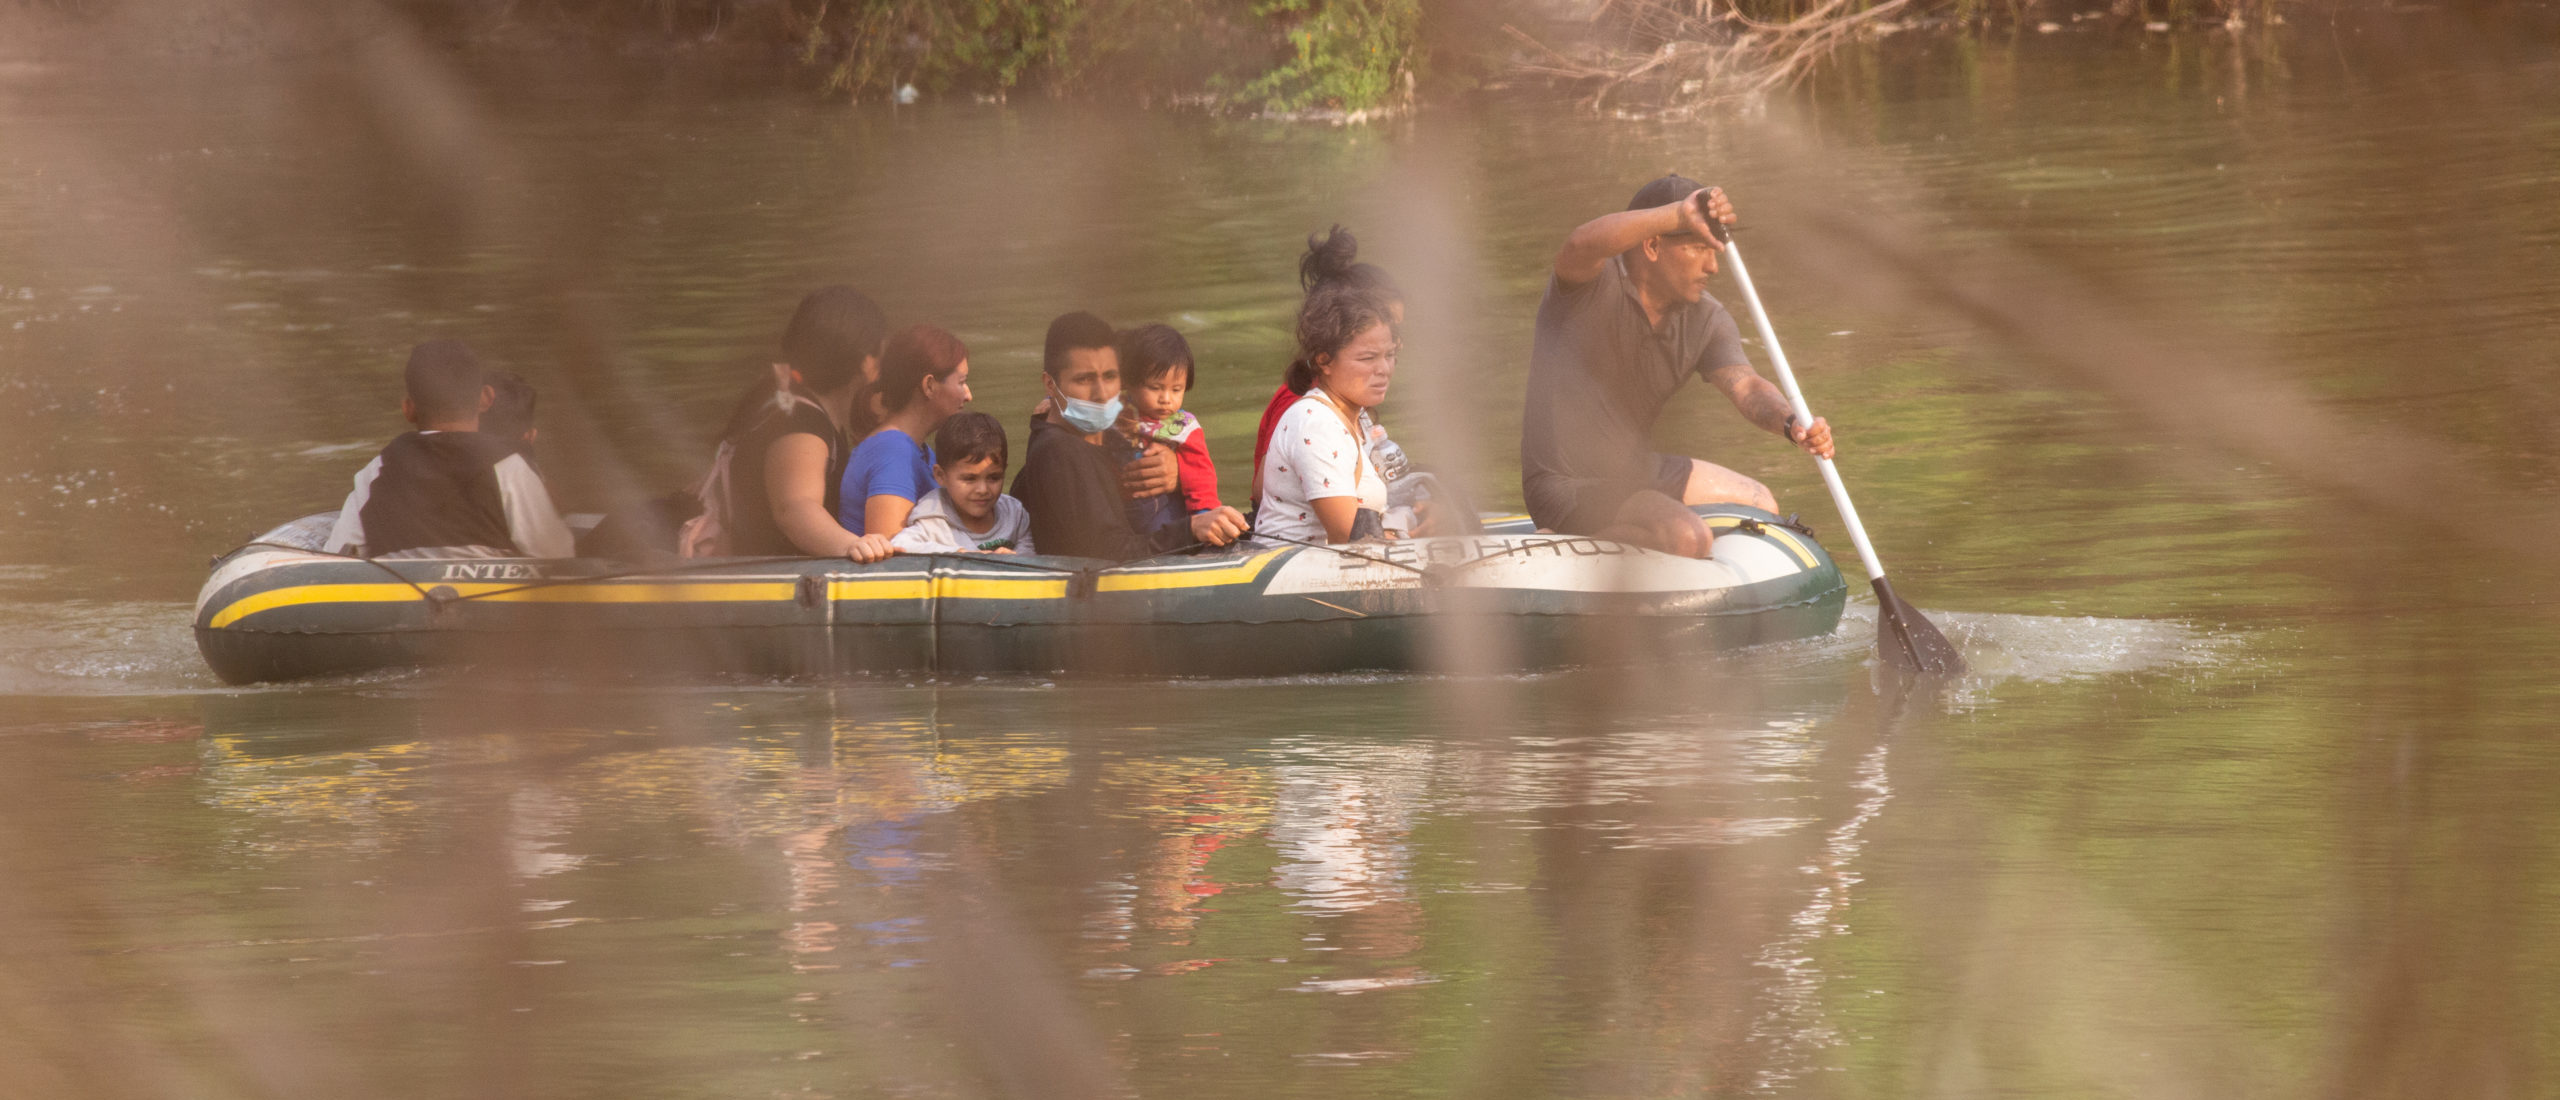 Smugglers use an inflatable raft to transport migrants across the Rio Grande River so they can illegally cross into the Rincon Village near McAllen, Texas, on March 24, 2021. (Kaylee Greenlee. - Daily Caller News Foundation)